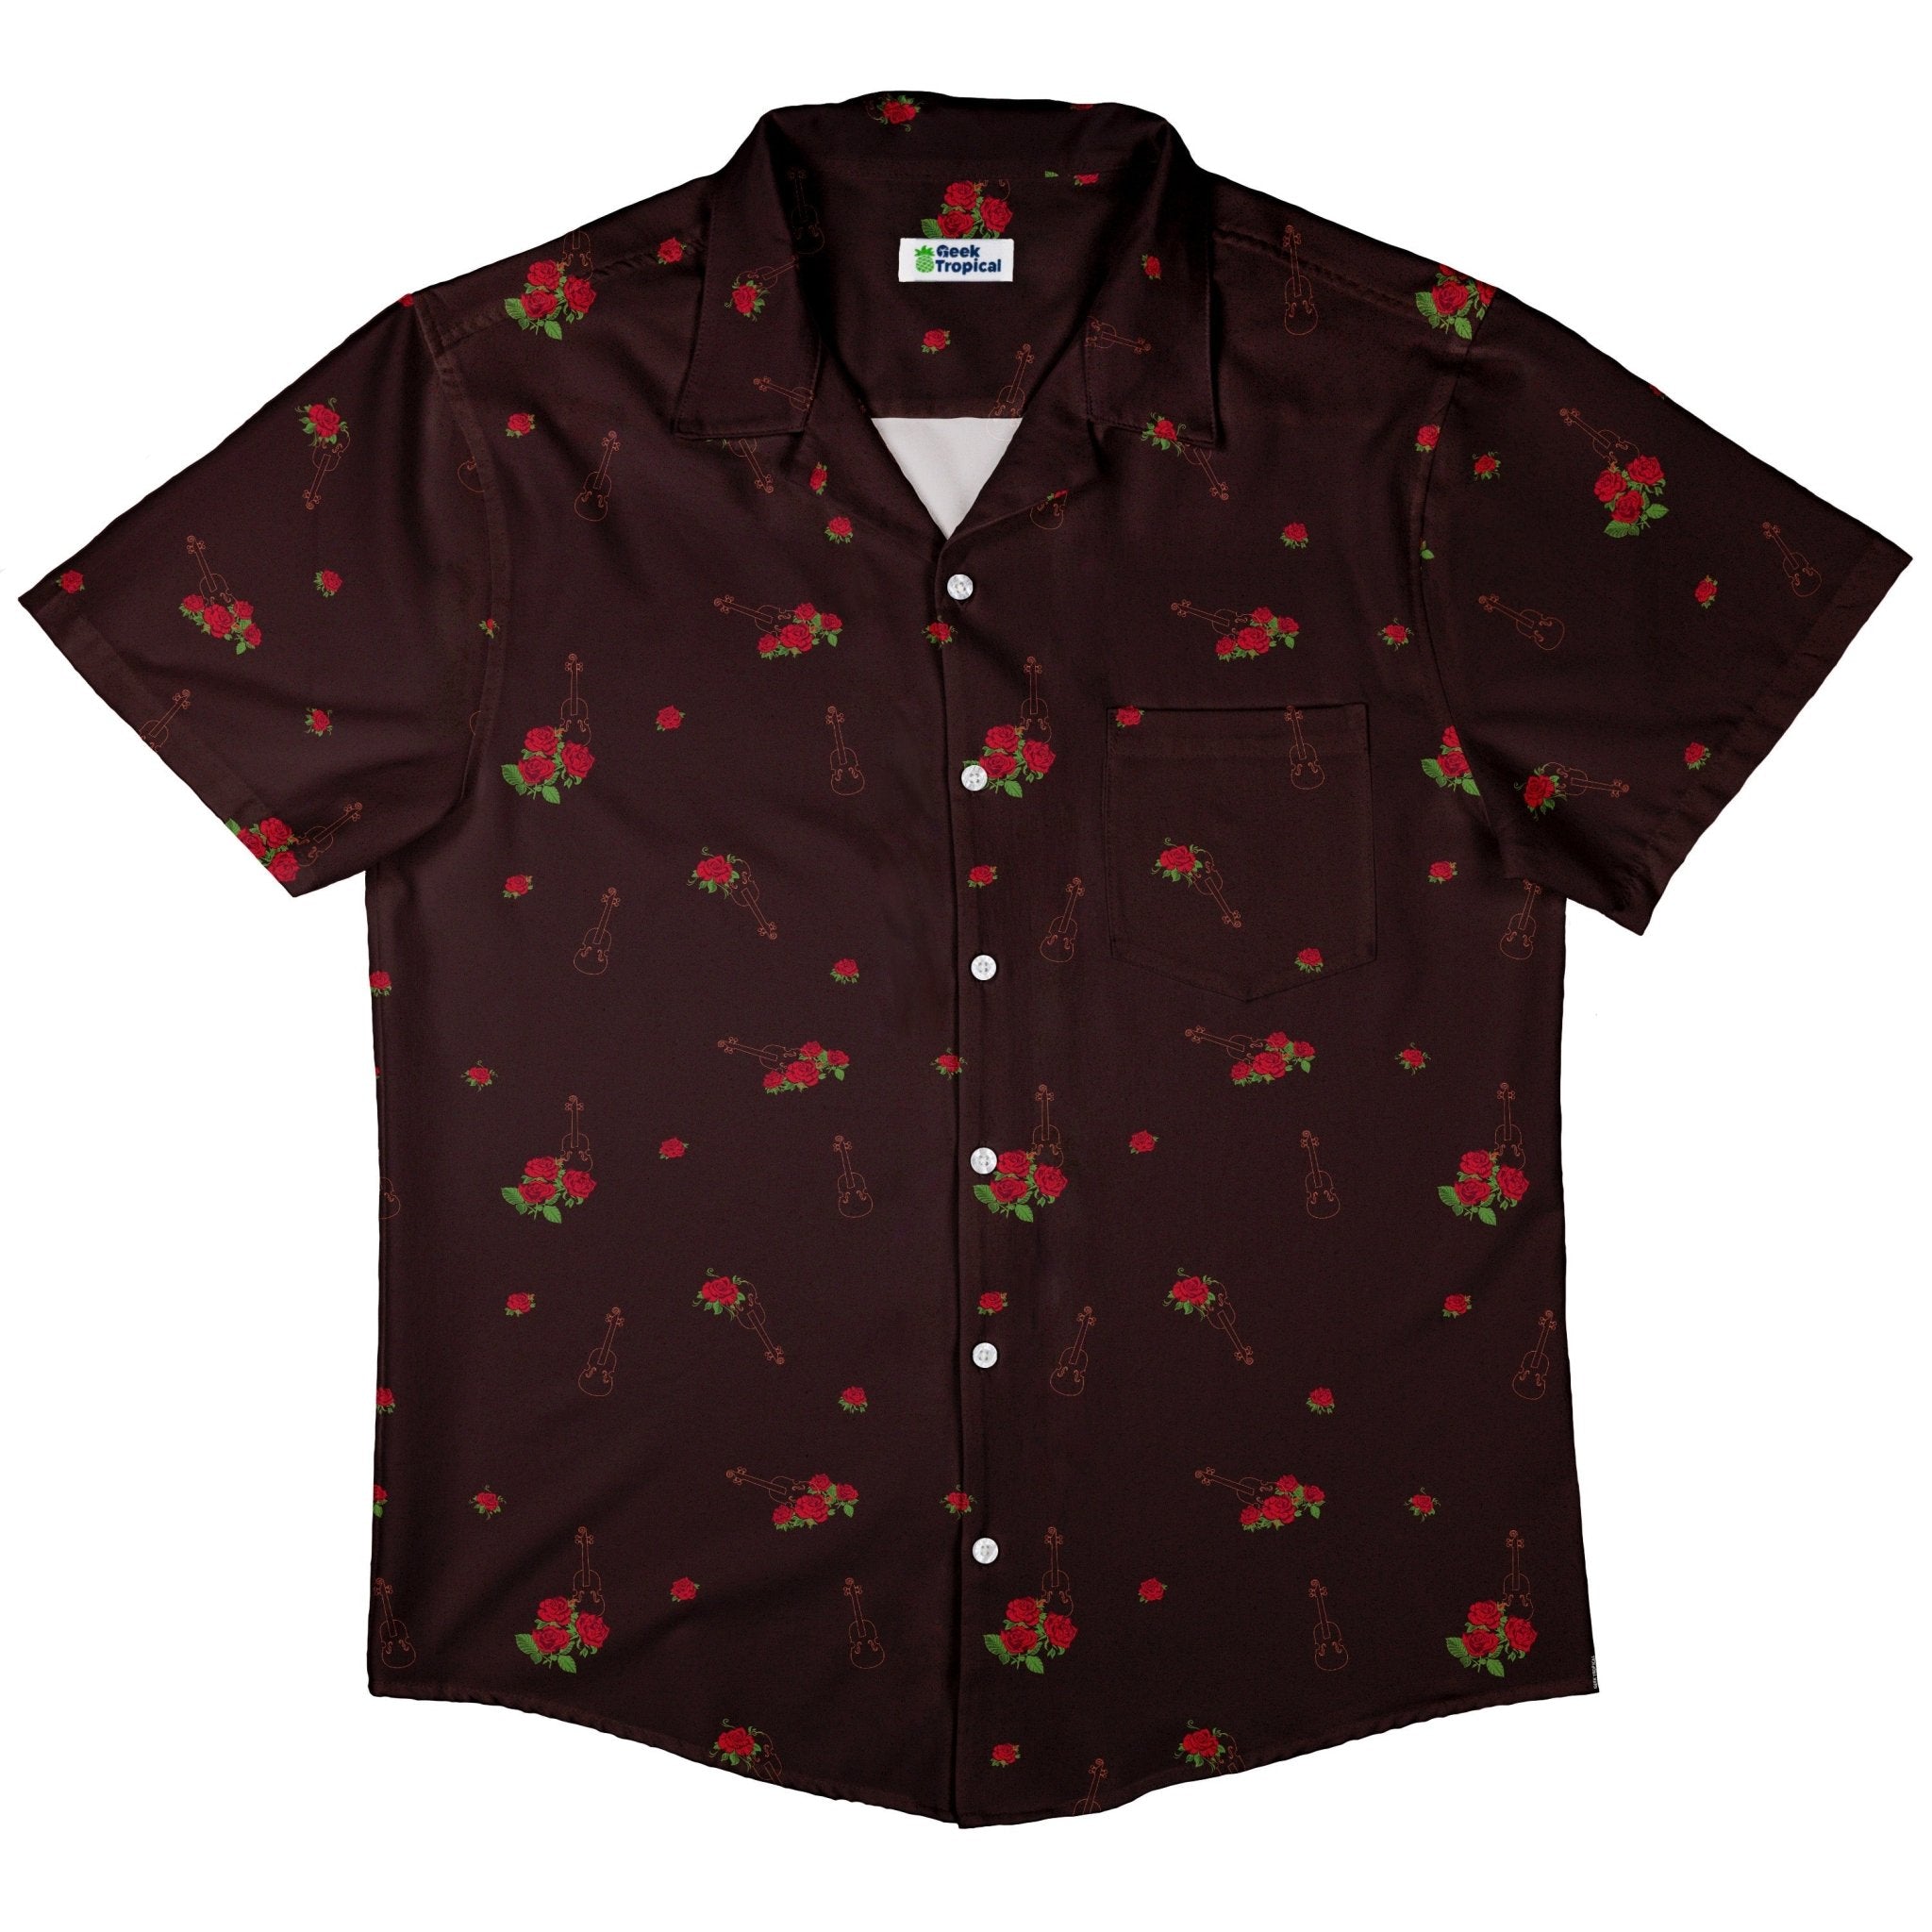 Floral Violin Melody Button Up Shirt - adult sizing - Design by Dunking Toast - music print